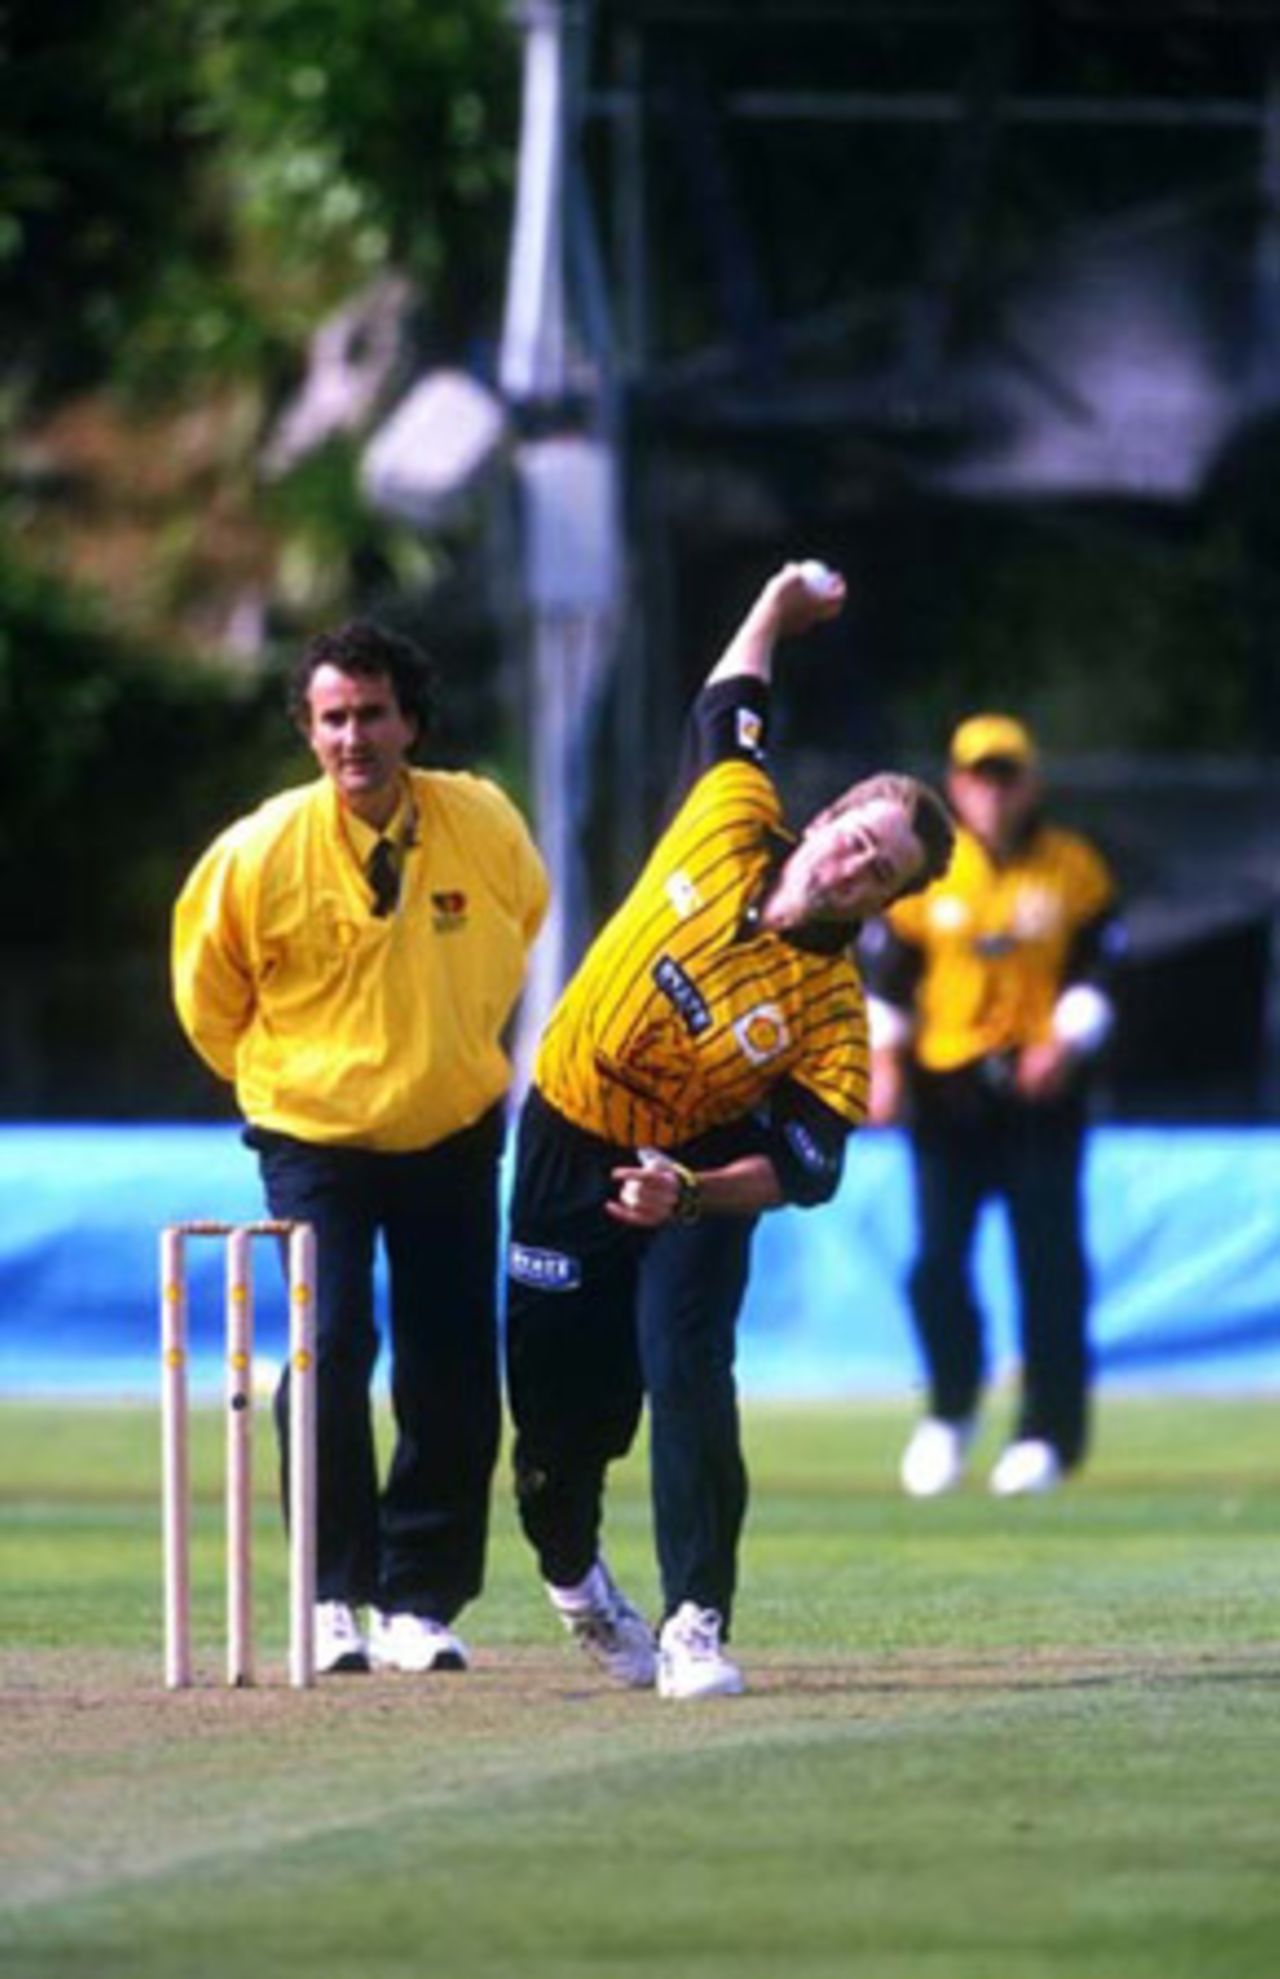 Wellington bowler Paul Hitchcock delivers a ball during his spell of 1-41 from 10 overs while umpire Brent Bowden looks on. Shell Cup: Auckland v Wellington at Eden Park Outer Oval, Auckland, 27 December 2000.